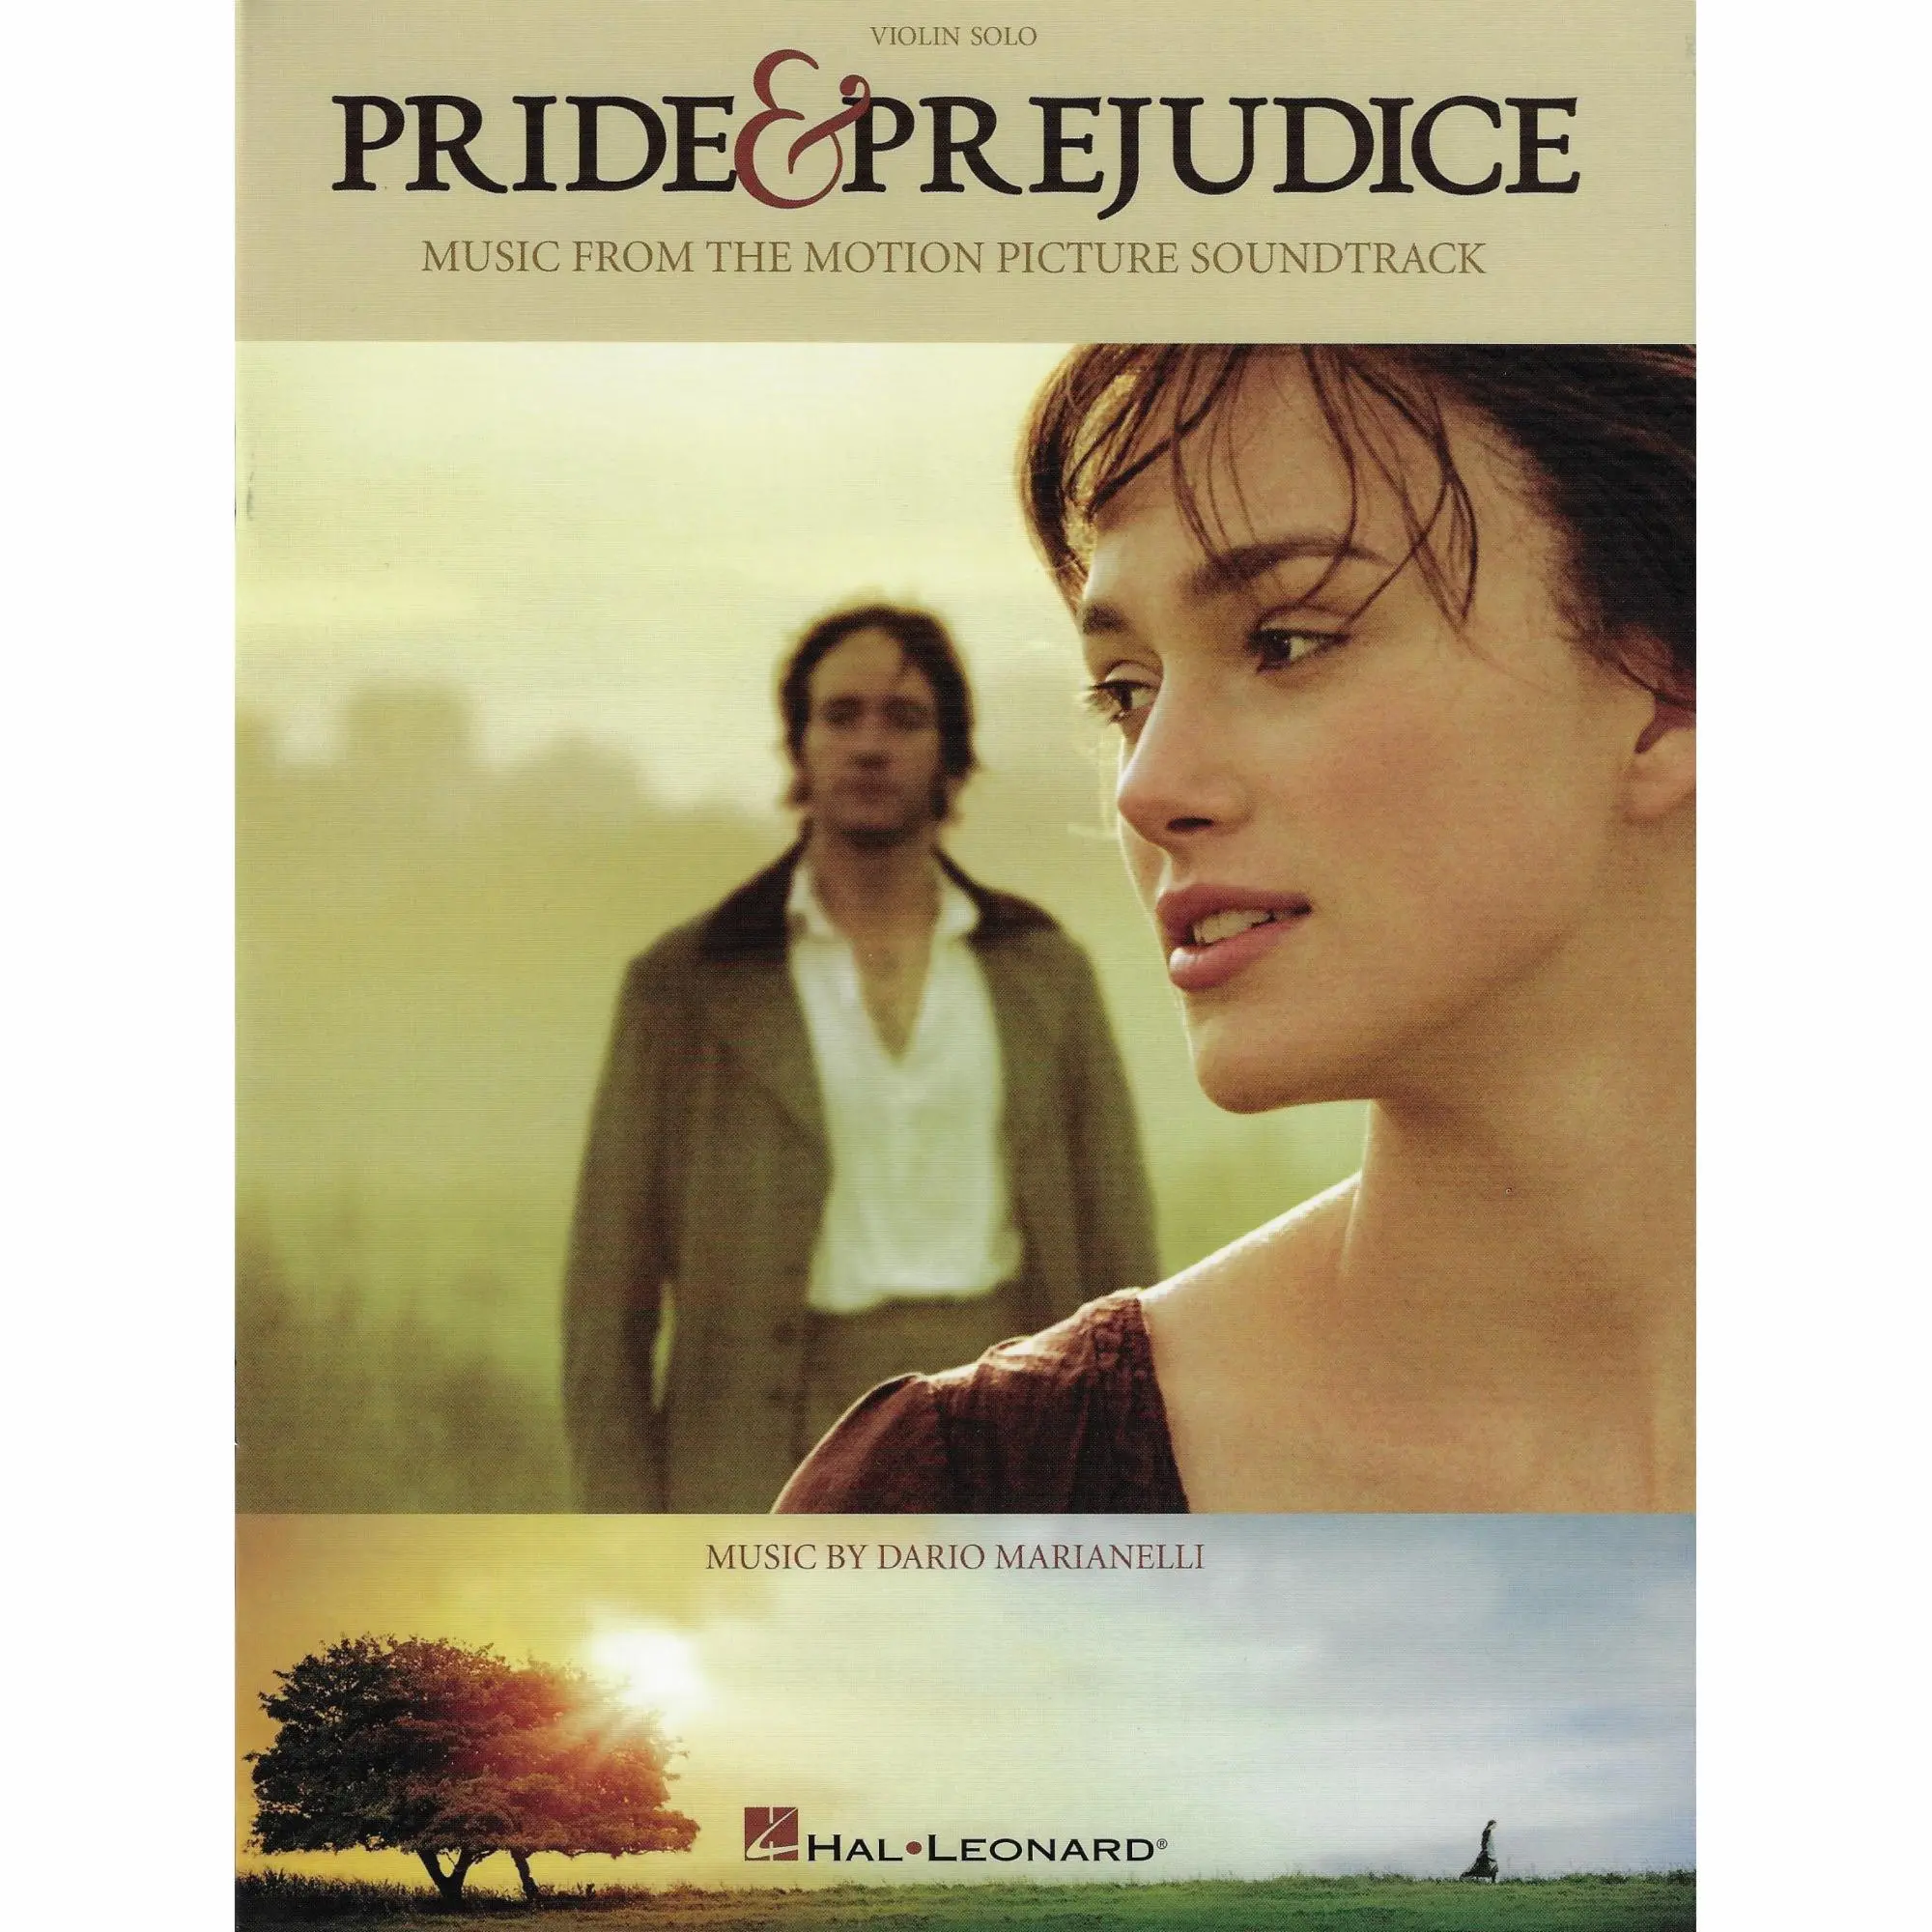 pride and prejudice en violines - What is the piece of music played in Pride and Prejudice